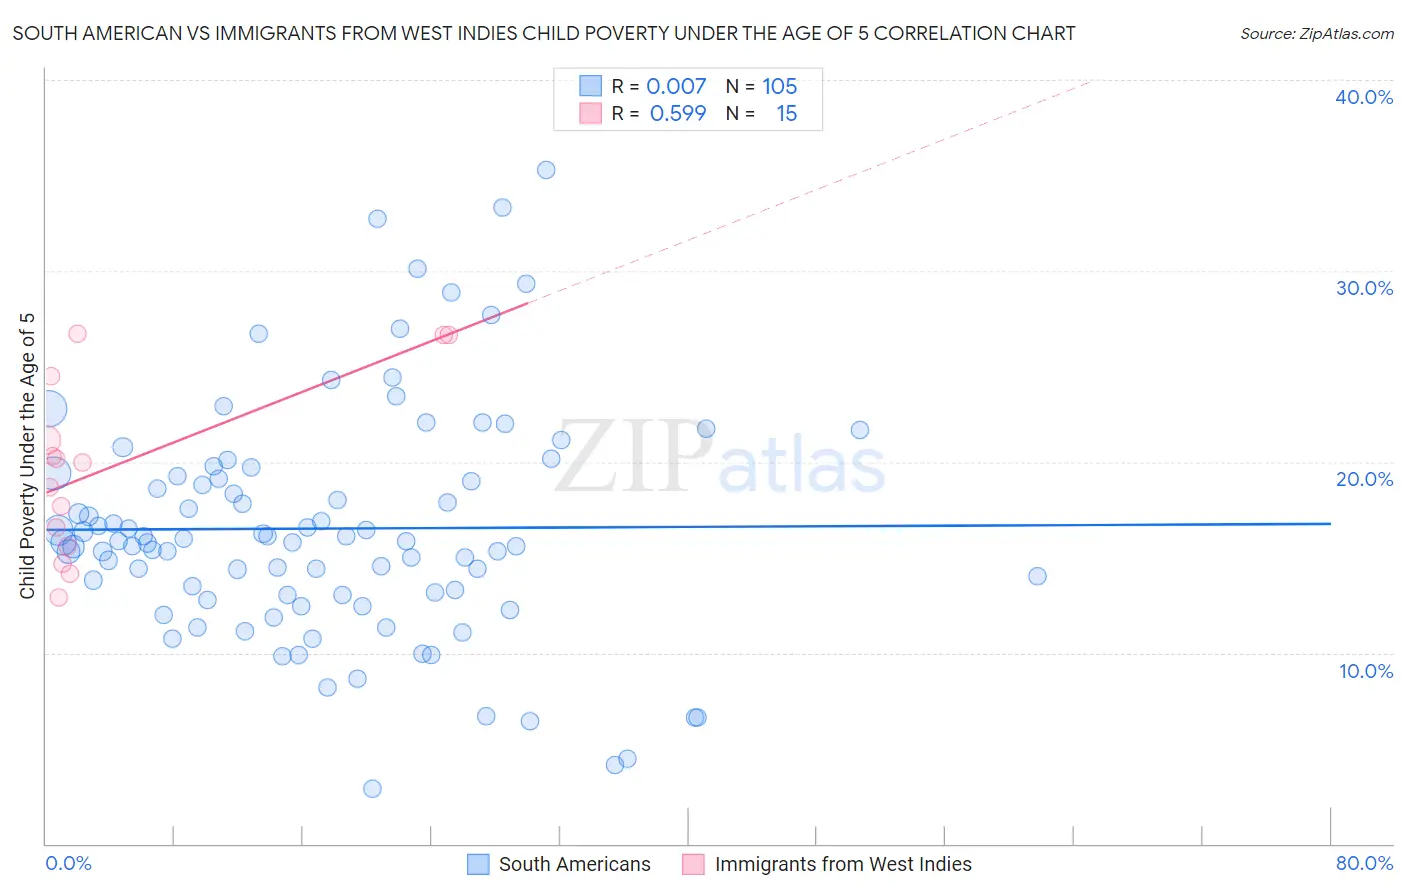 South American vs Immigrants from West Indies Child Poverty Under the Age of 5